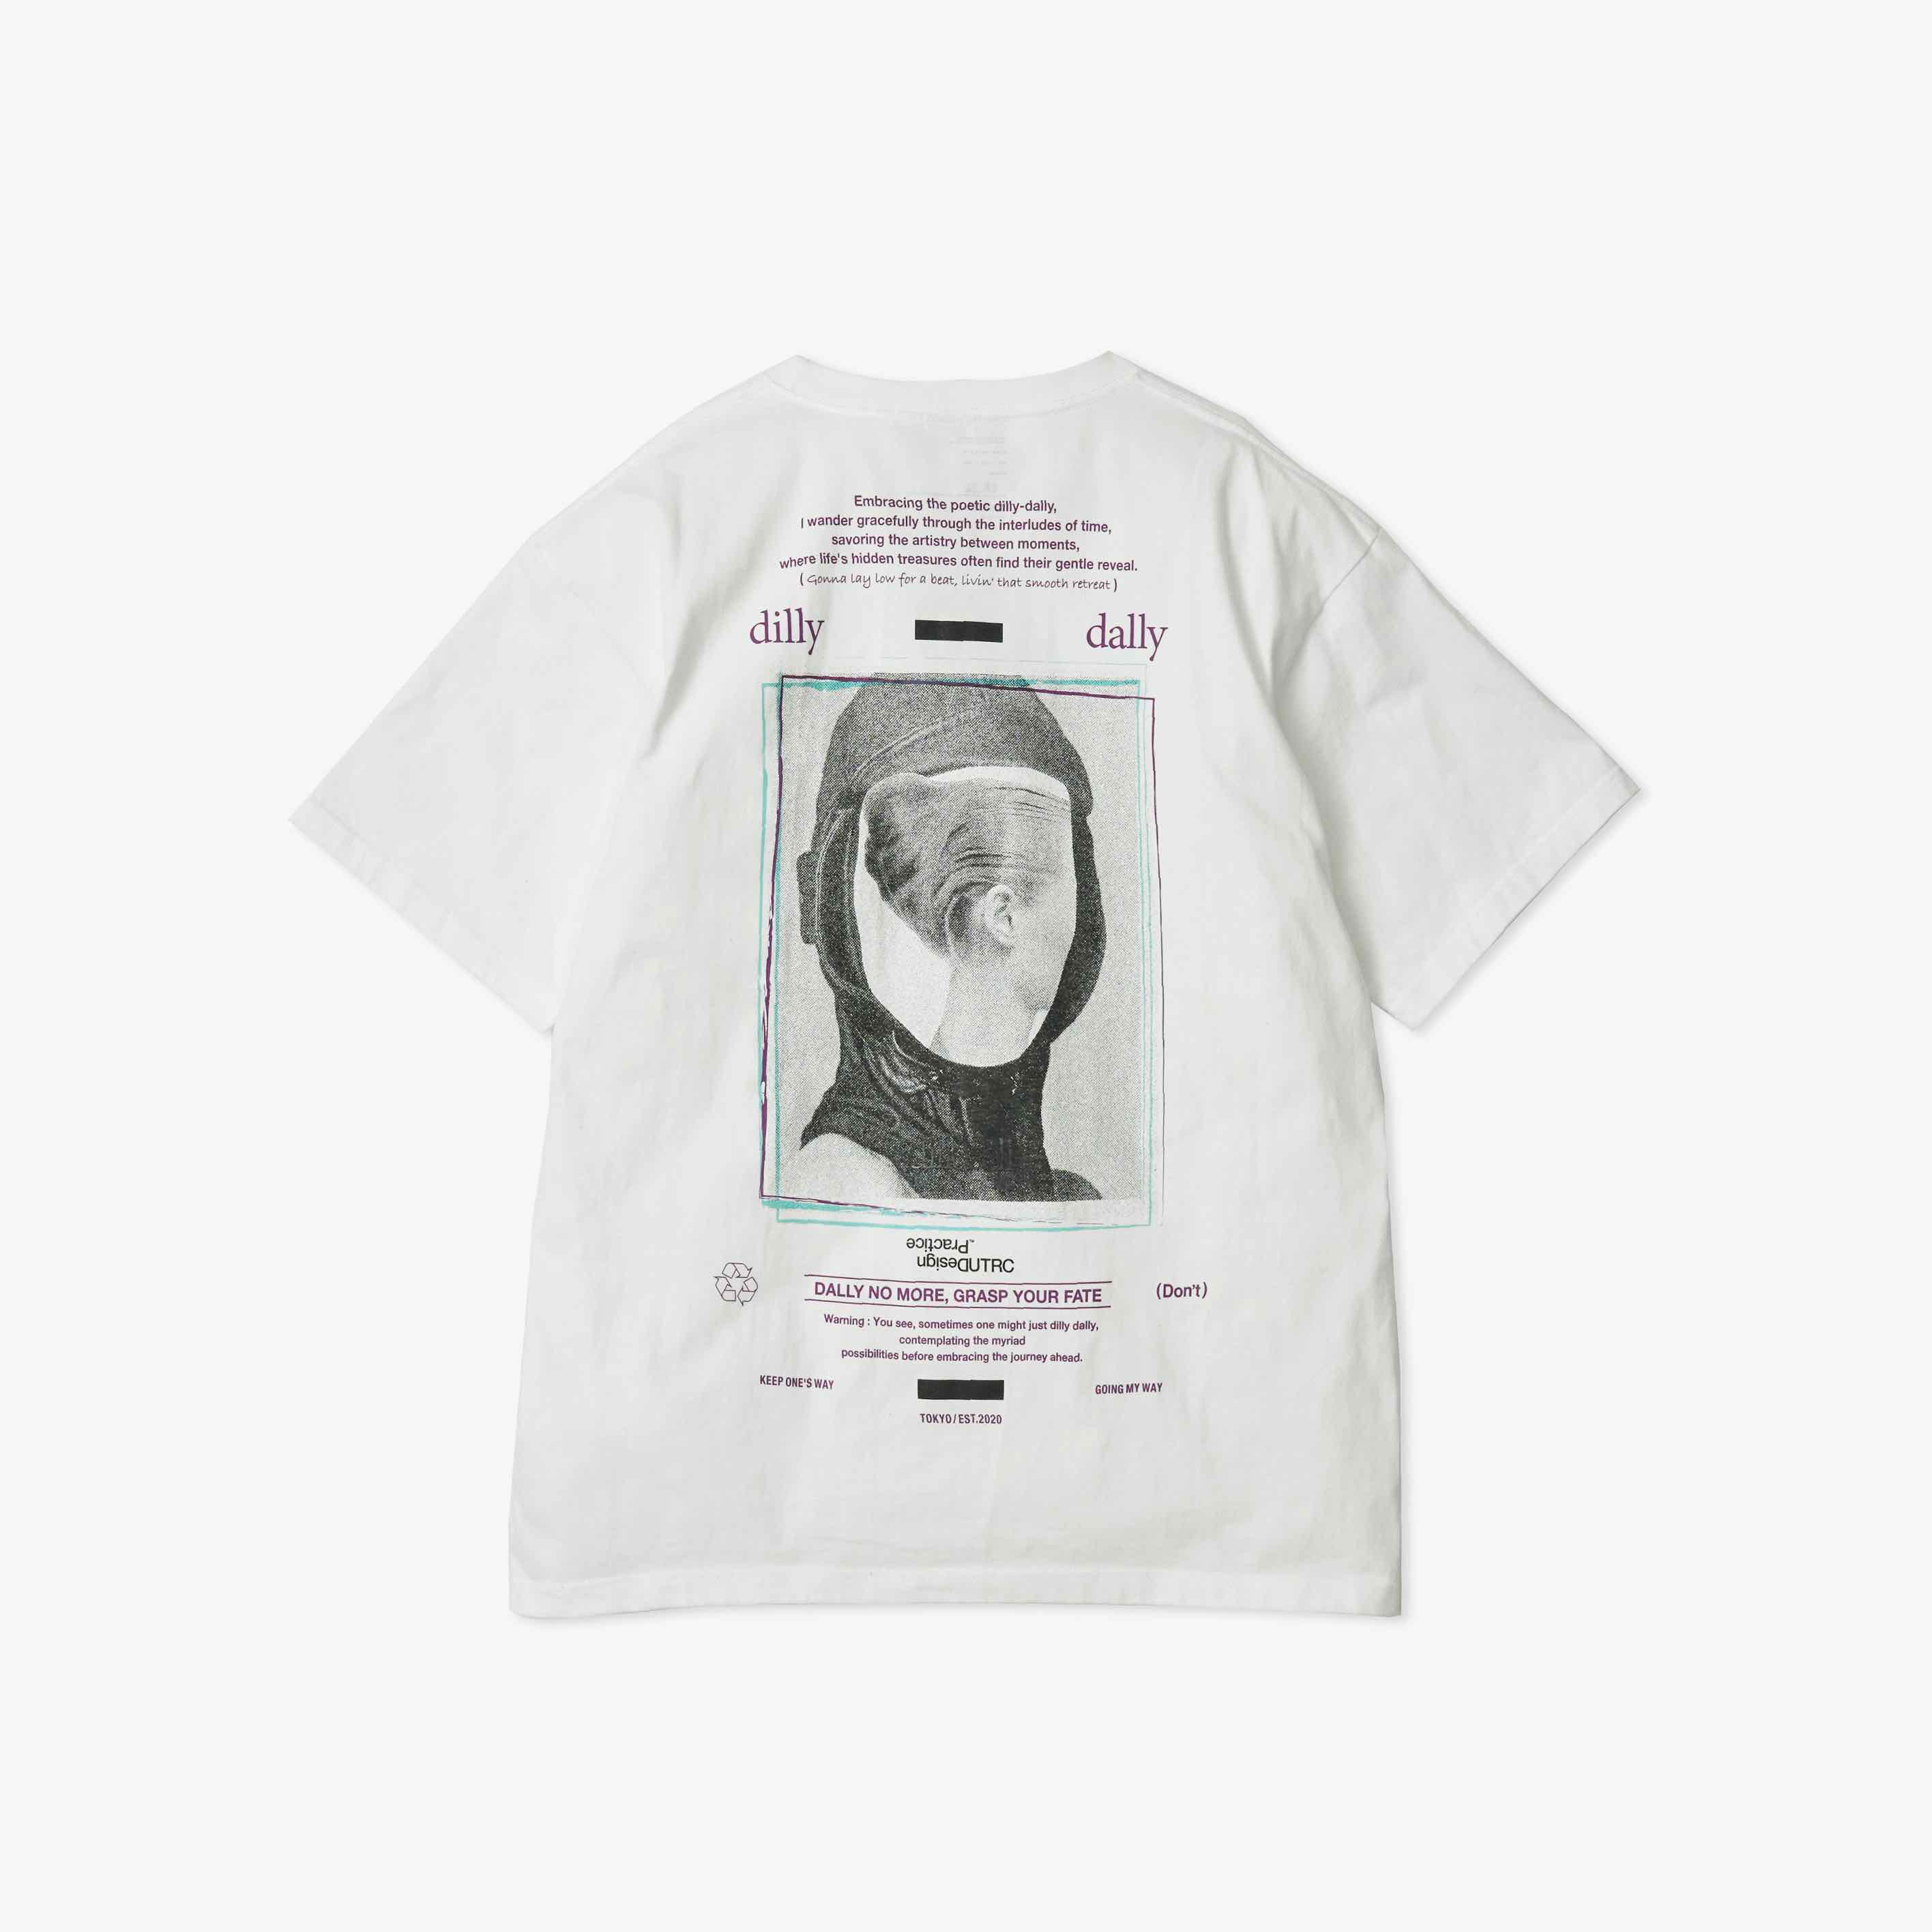 【UNTRACE(アントレース)】dilly dally TEE SHIRT/ WHITE